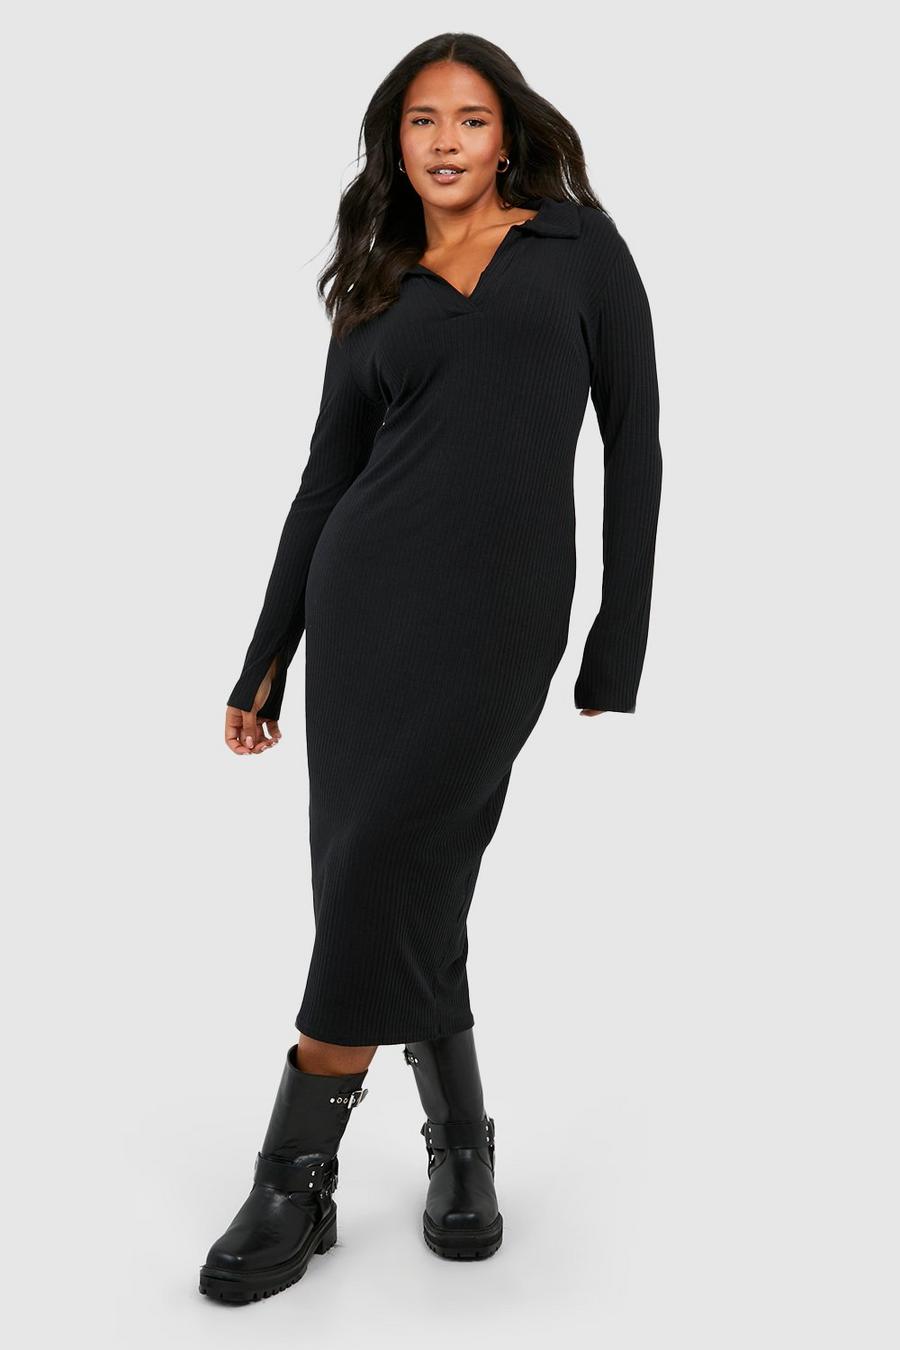 Plus Size Long Sleeve Dresses  Plus Size Dresses with Sleeves